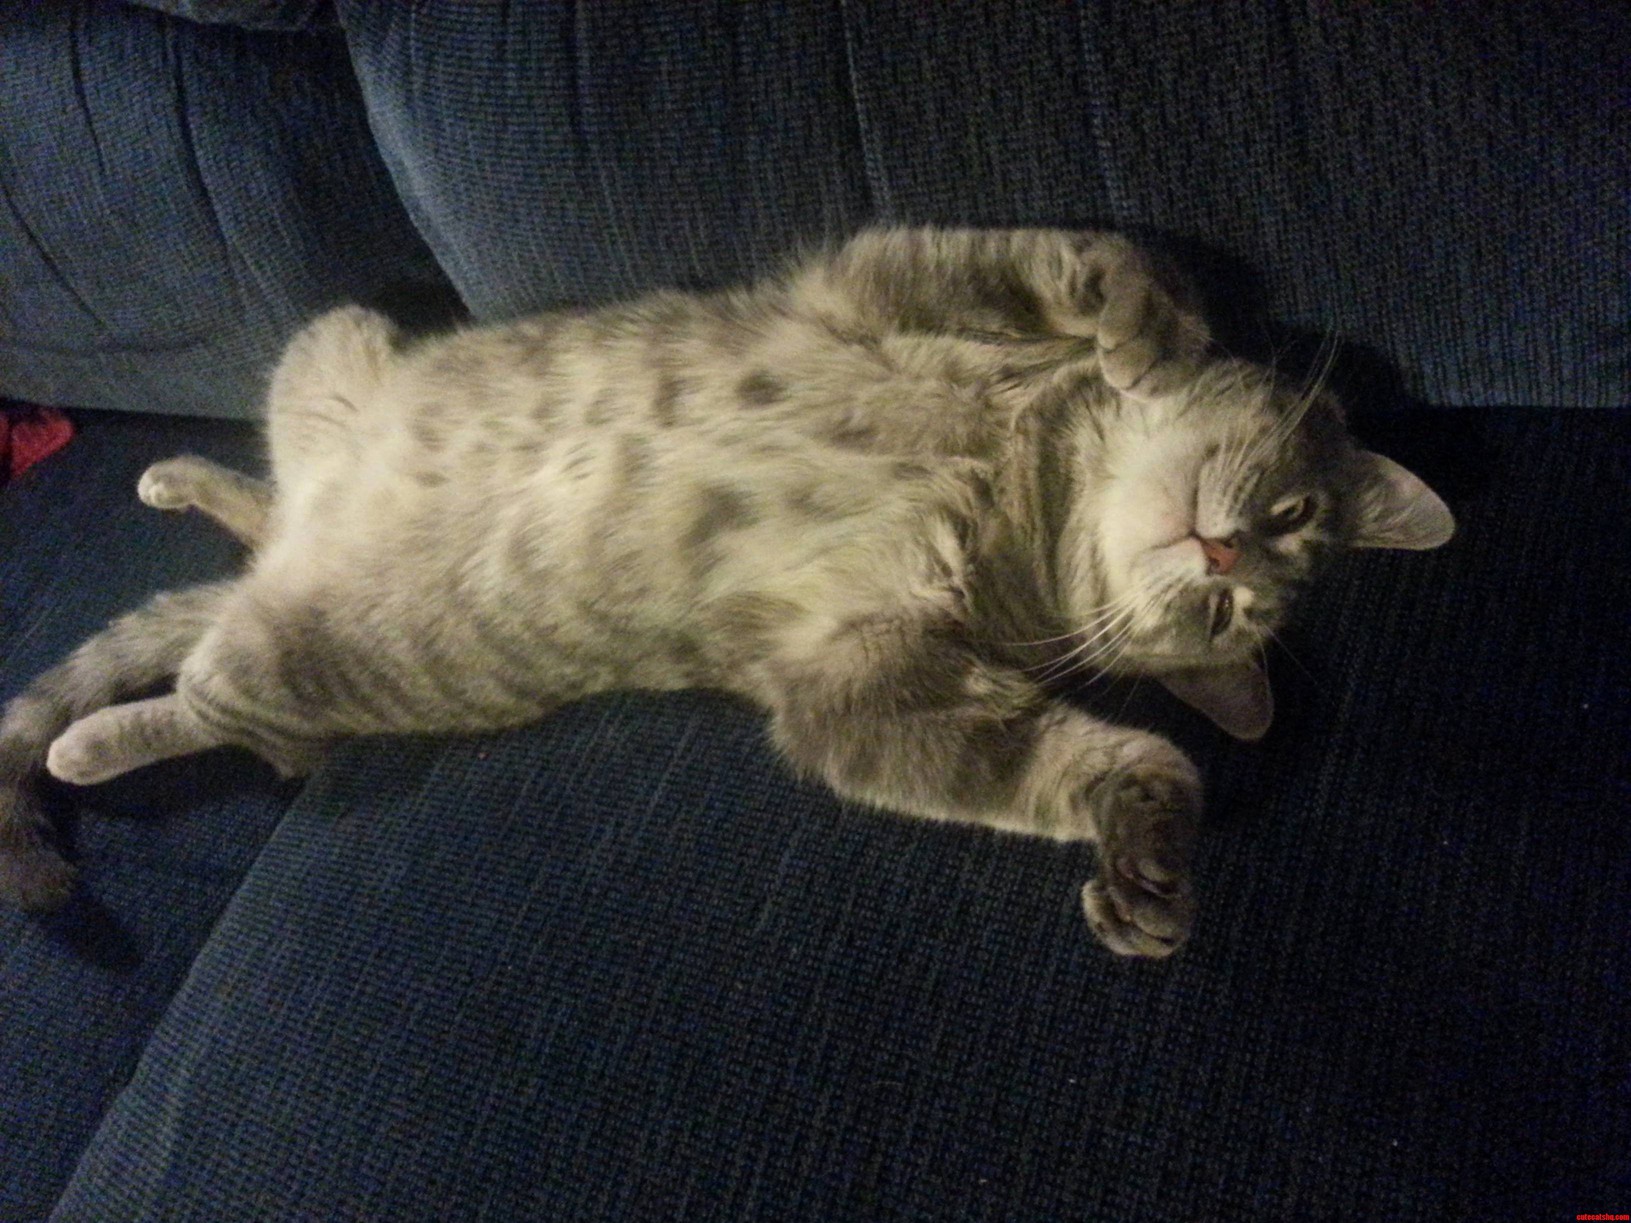 Hi Im Stormageddon And This Is My Belly. You May Rub It Now.